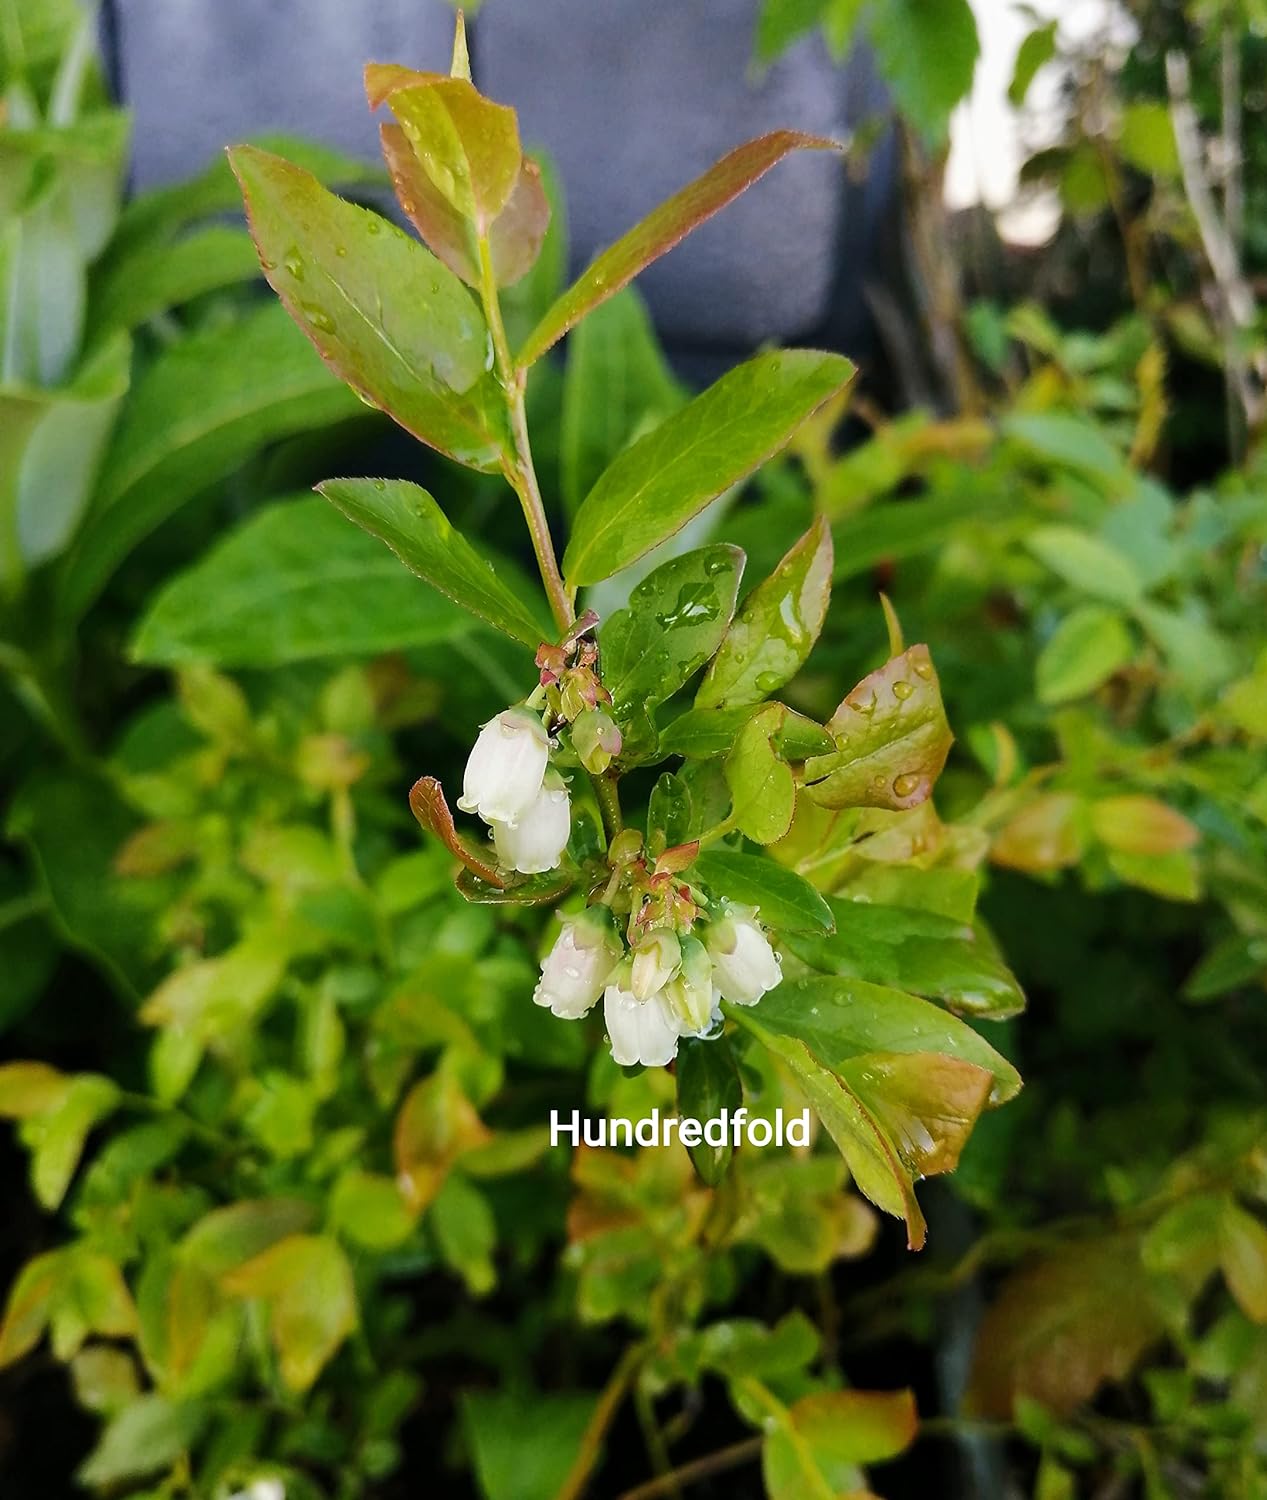 Hundredfold Lowbush Blueberry 1 Seedling - Vaccinium angustifolium Wild Blueberry Canada Native Fruit Shrub Bare Rooted Rare Root One Small Live Plant (No Pot), Produce Small But Tasty Berries